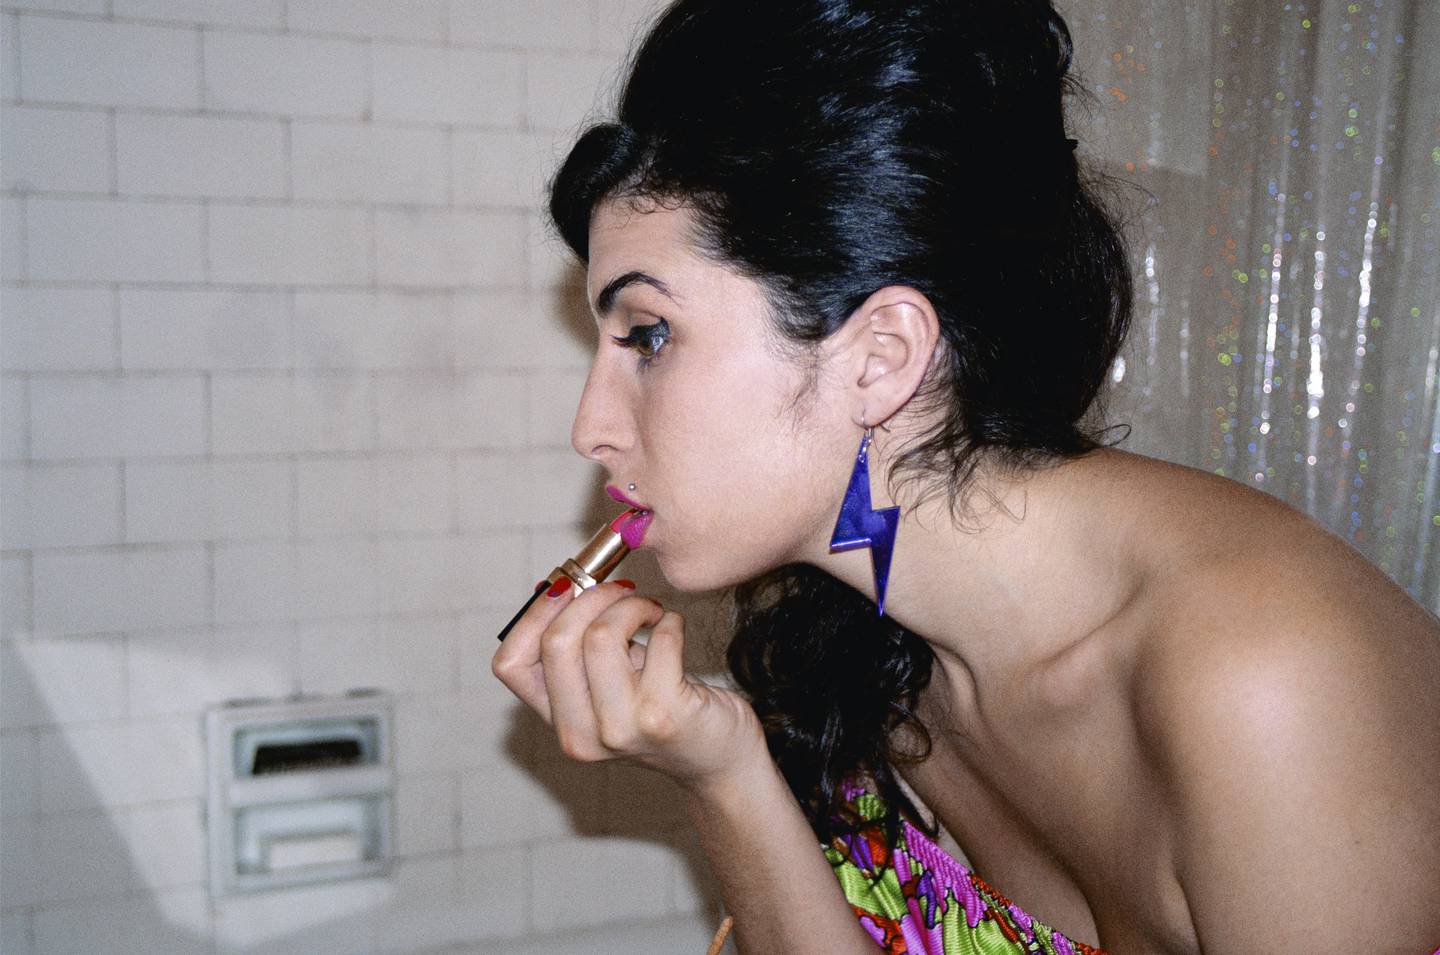 Amy Winehouse wearing purple thunderbolt earrings and applying pink lipstick in a New York bathroom, is now part of the National Portrait Gallery collection in London.